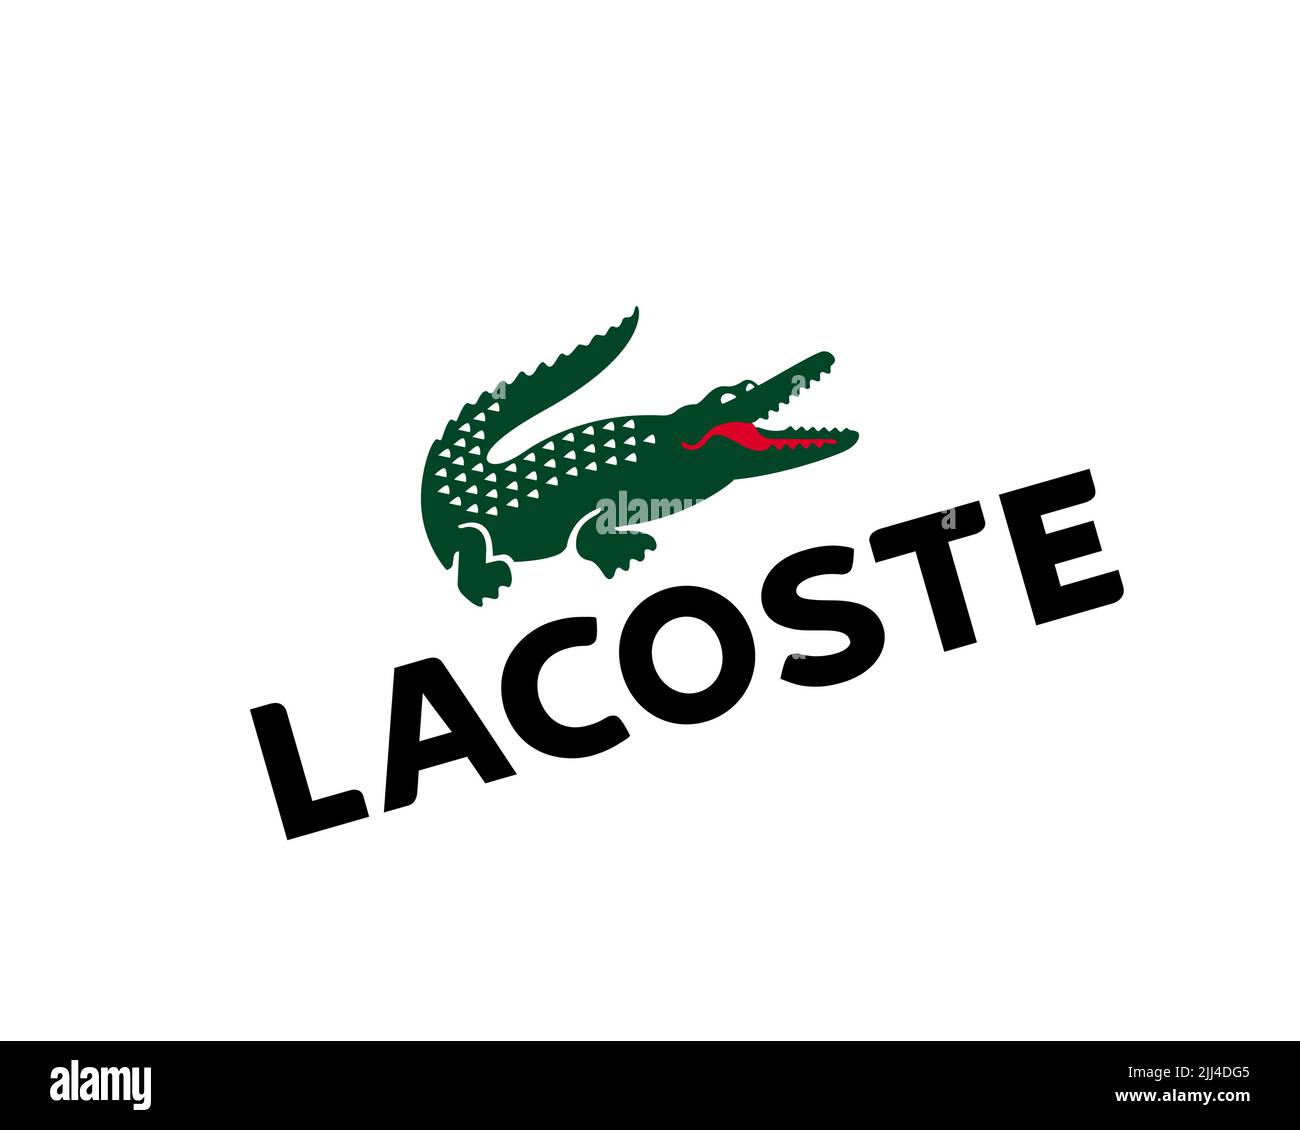 Army Uden tvivl overraskende Company logo lacoste Cut Out Stock Images & Pictures - Alamy